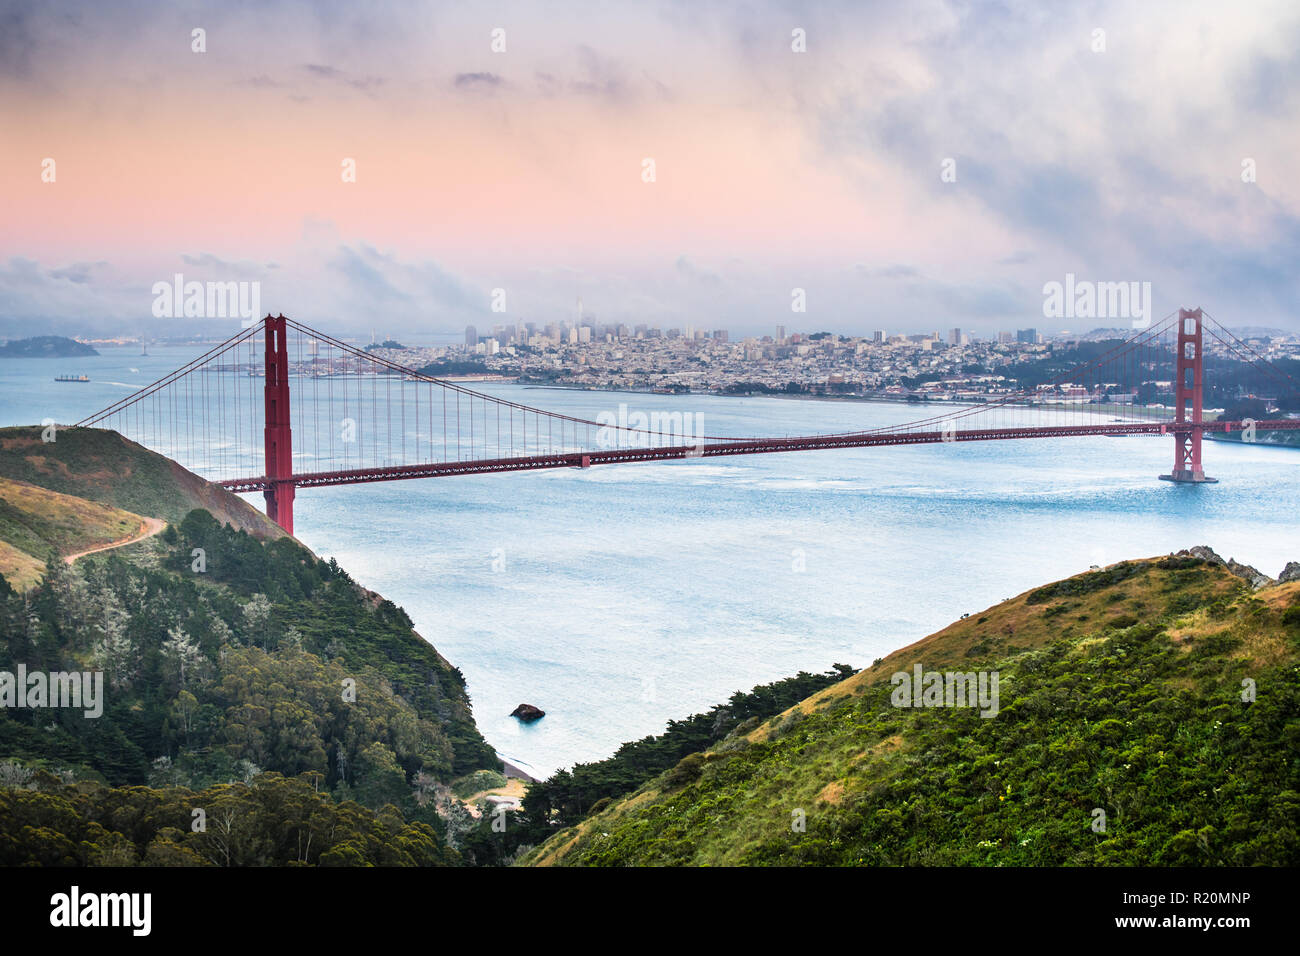 Panoramic view of Golden Gate Bridge connecting San Francisco and Marin Headlands, on a cloudy afternoon Stock Photo